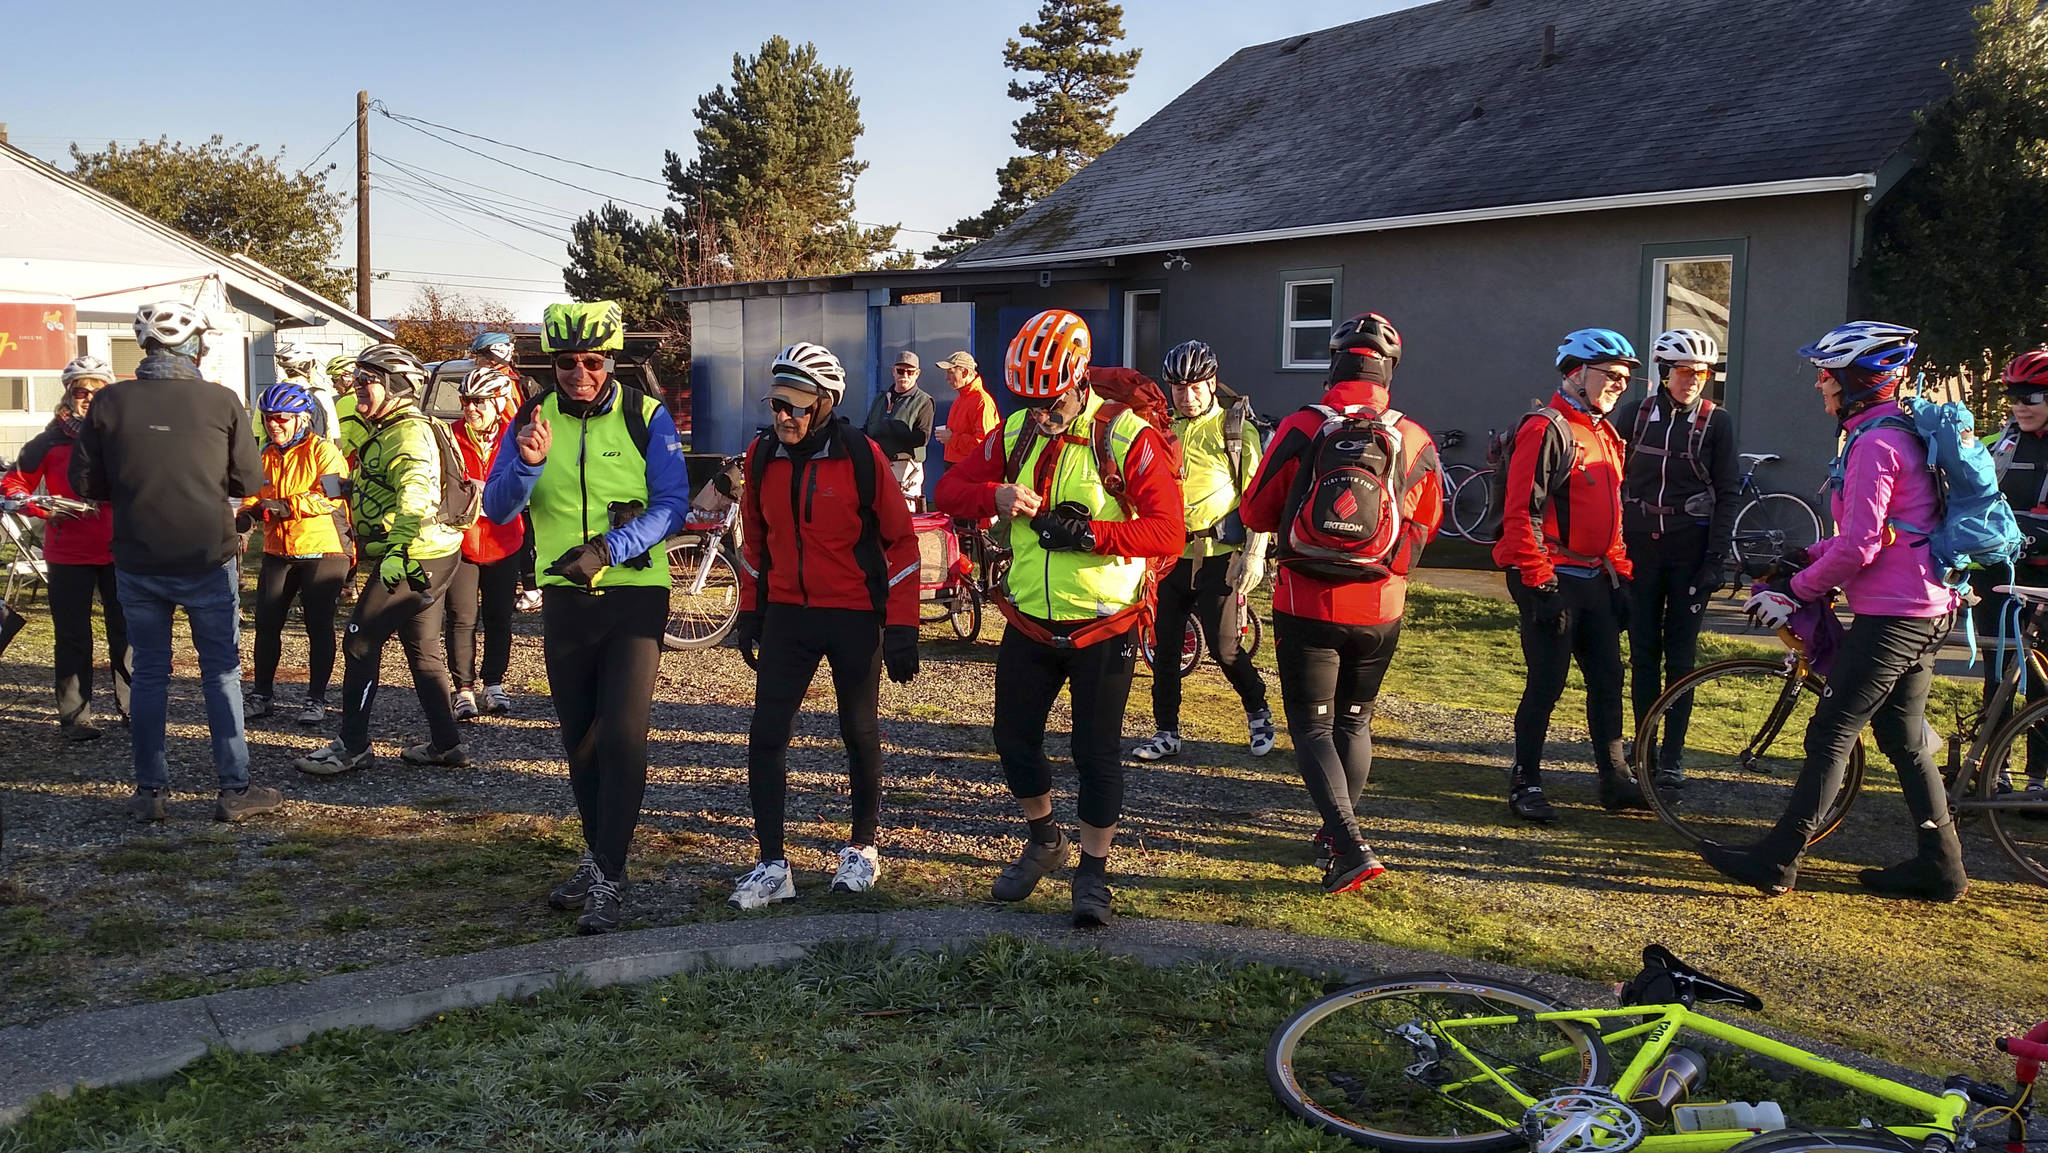 Participants gather for the 2018 Cranskgiving in Sequim. Photo courtesy of Tom Coonelly